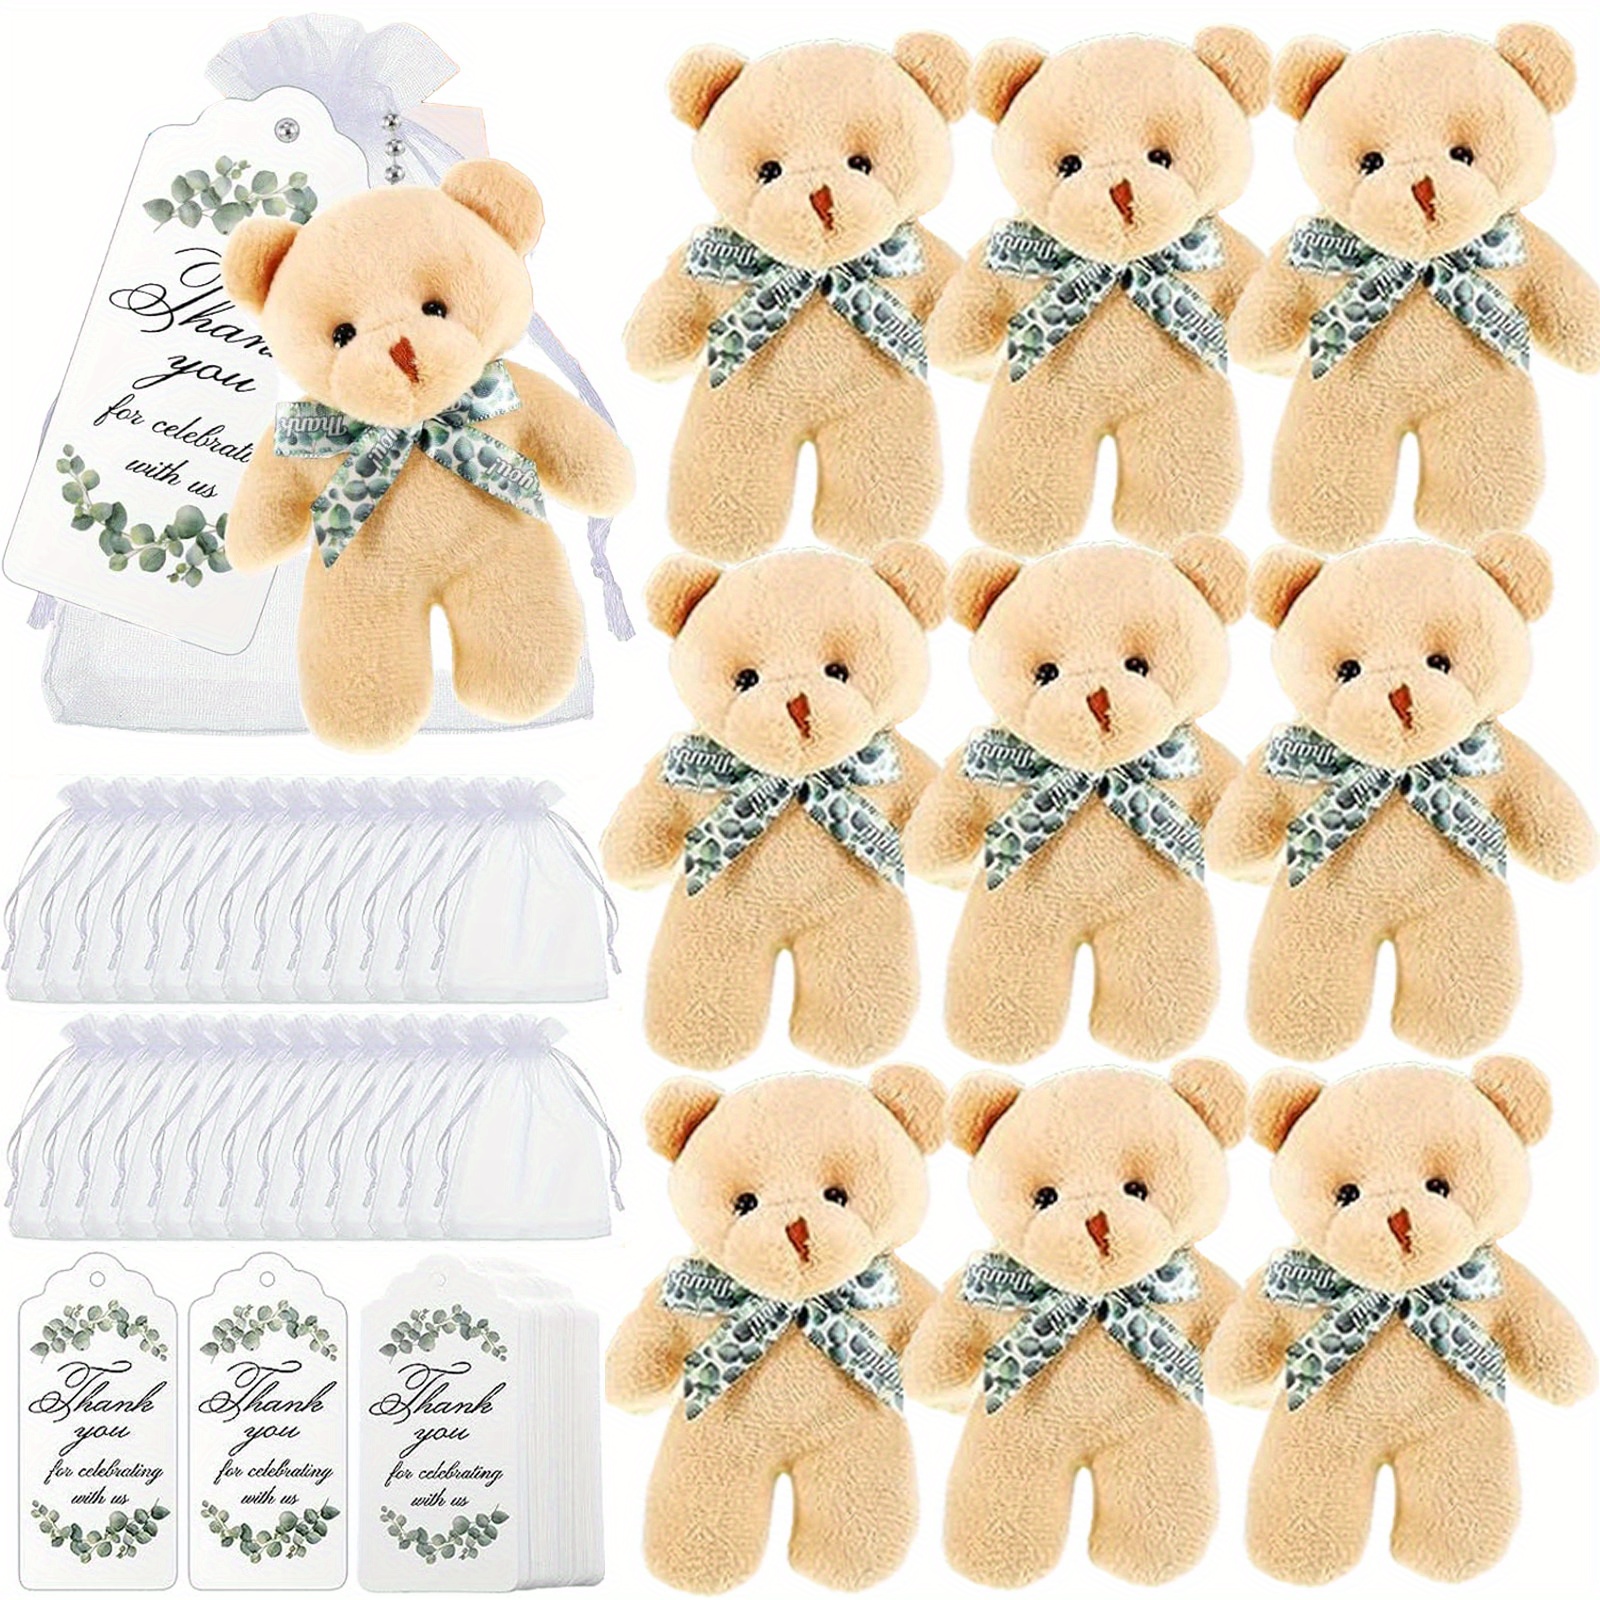 10 Sets, Baby Shower Small * Tiny Plush Bear Bulk 4.72 Inch Mini Stuffed  Animals Small Bear Party Favors With Thank You Tags And Mesh Bags For DIY